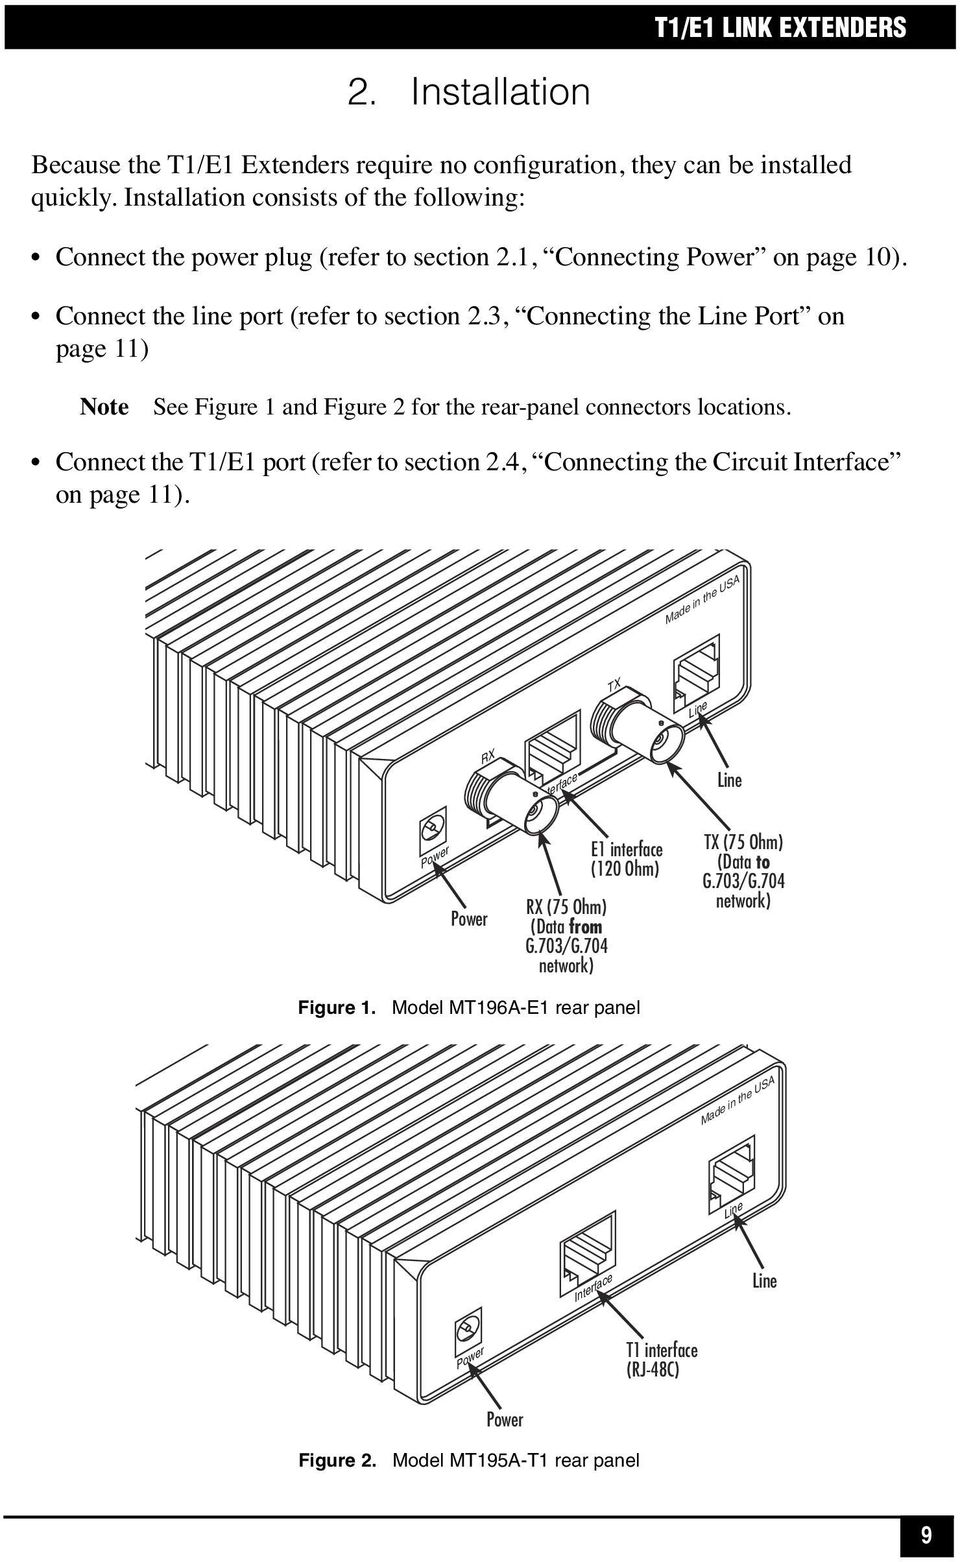 Connect the T1/E1 port (refer to section 2.4, Connecting the Circuit Interface on page 11). Made in the USA Power Figure 1.